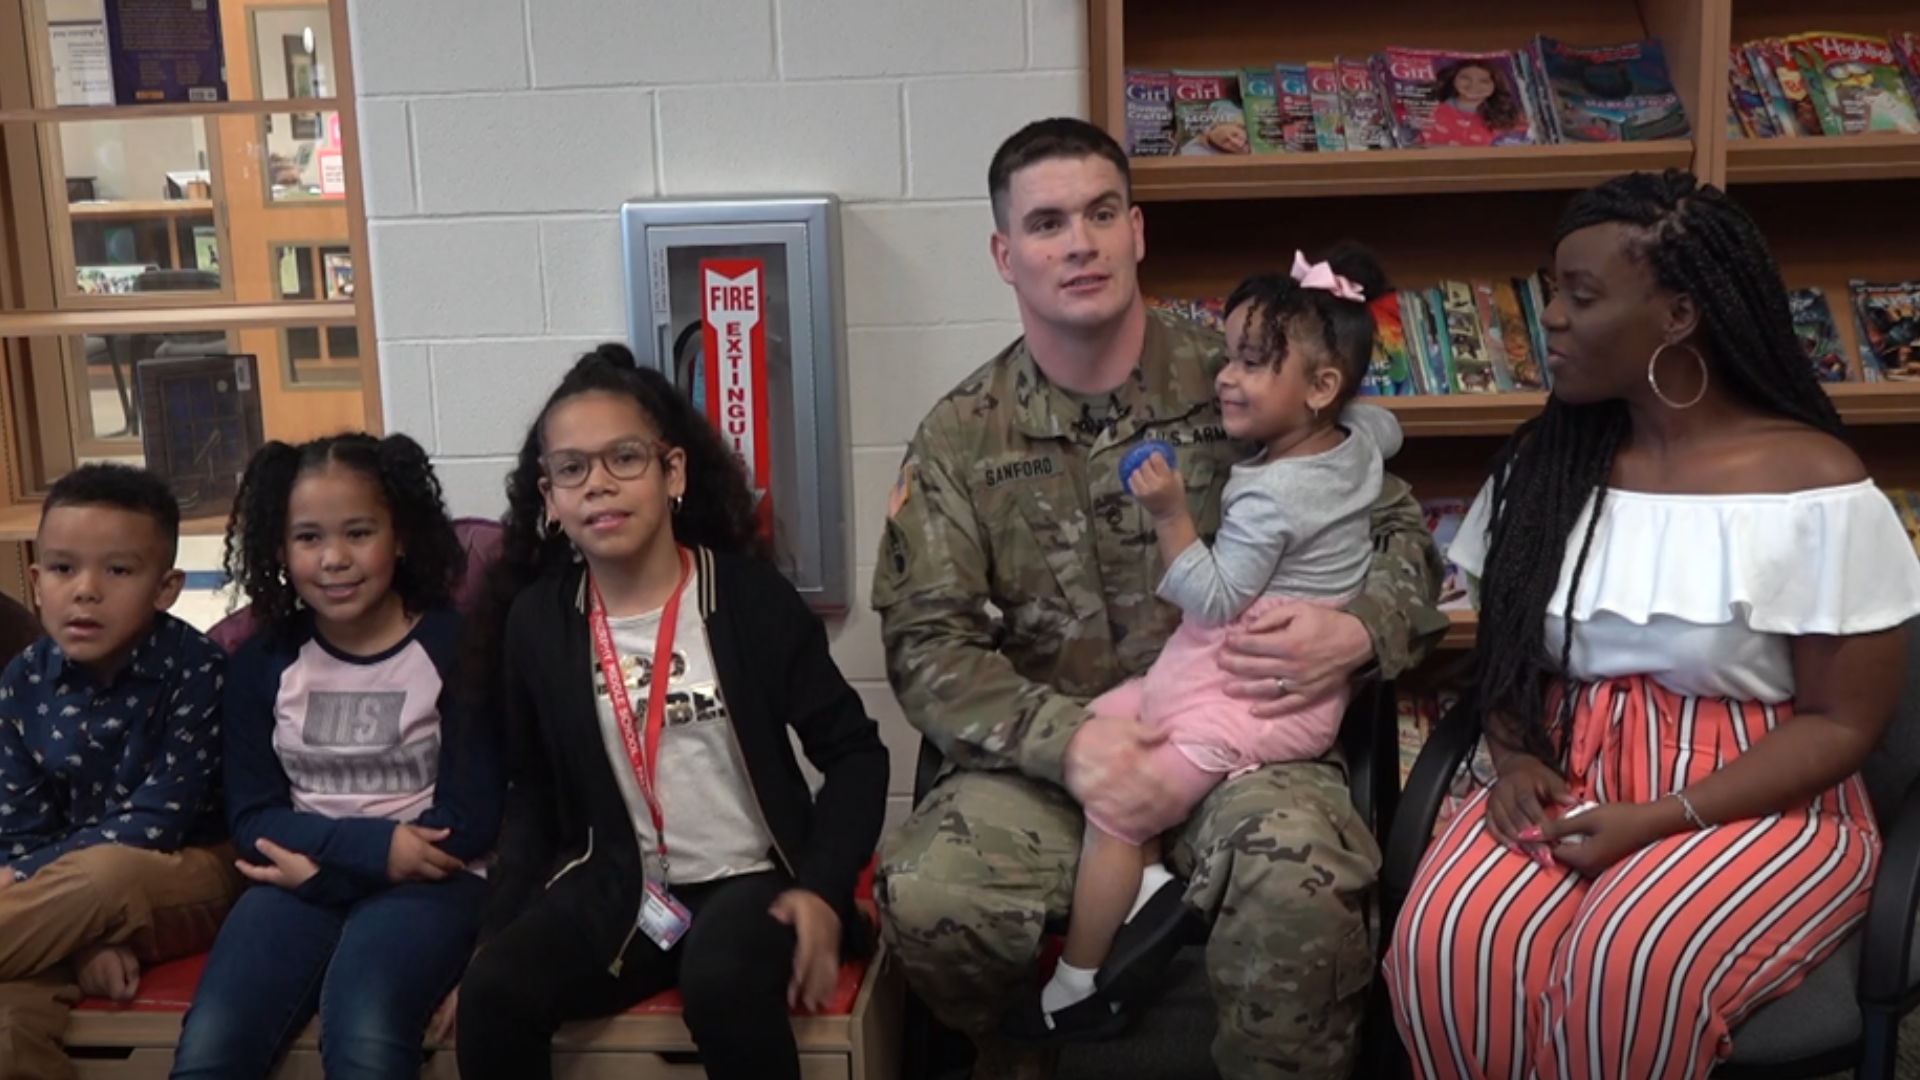 SSG Matthew Sanford just returned from an eight-month deployment to Korea and took the opportunity to give his kids the surprise of a lifetime.